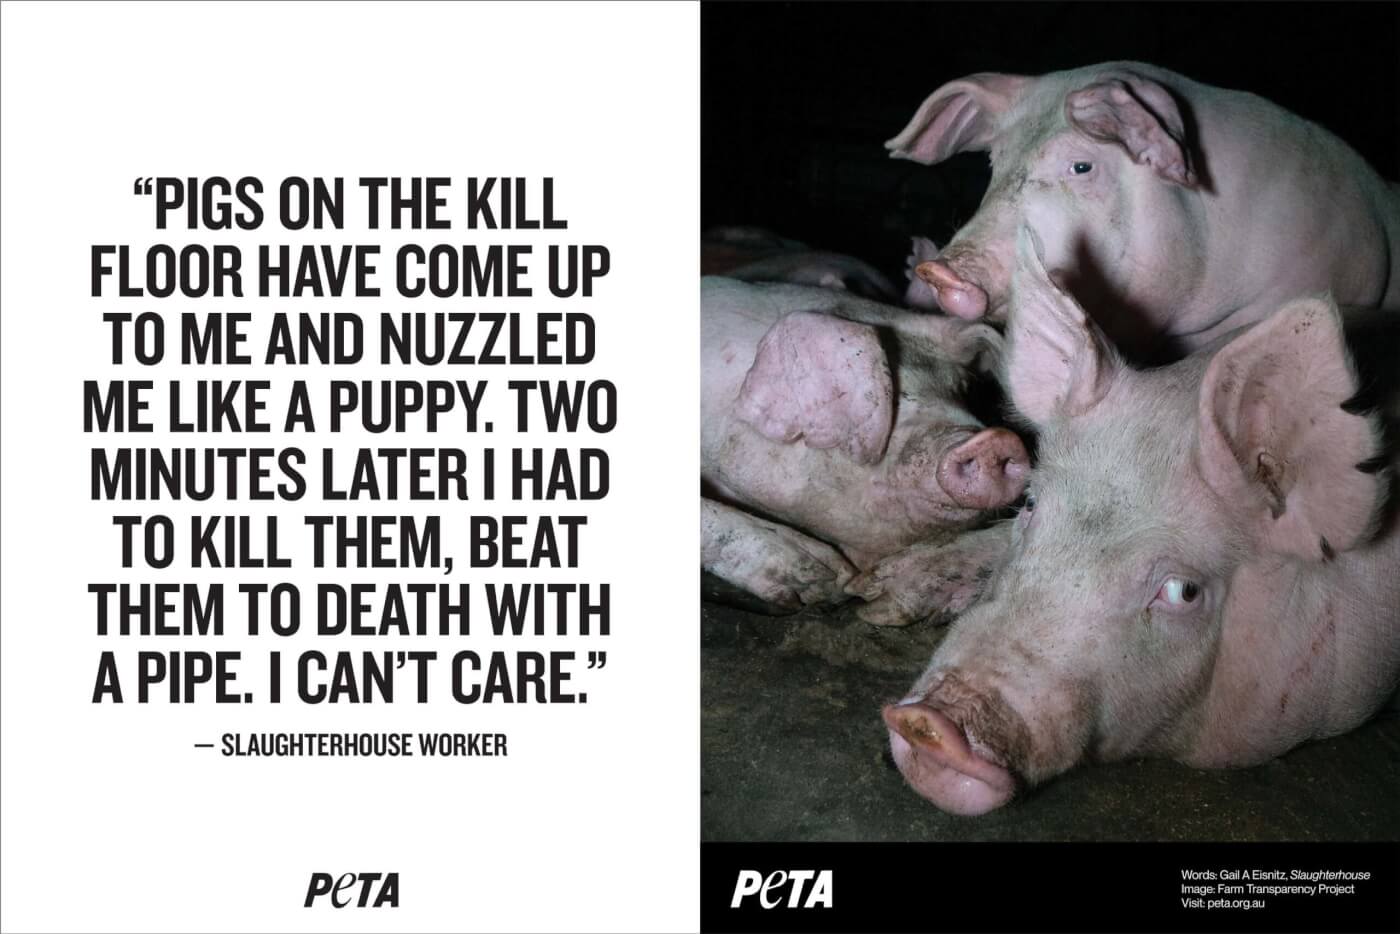 On the left is a quote: “Pigs on the kill floor have come up to me and nuzzled me like a puppy. Two minutes later I had to kill them, beat them to death with a pipe. I can’t care.” And on the right is an image of pigs.